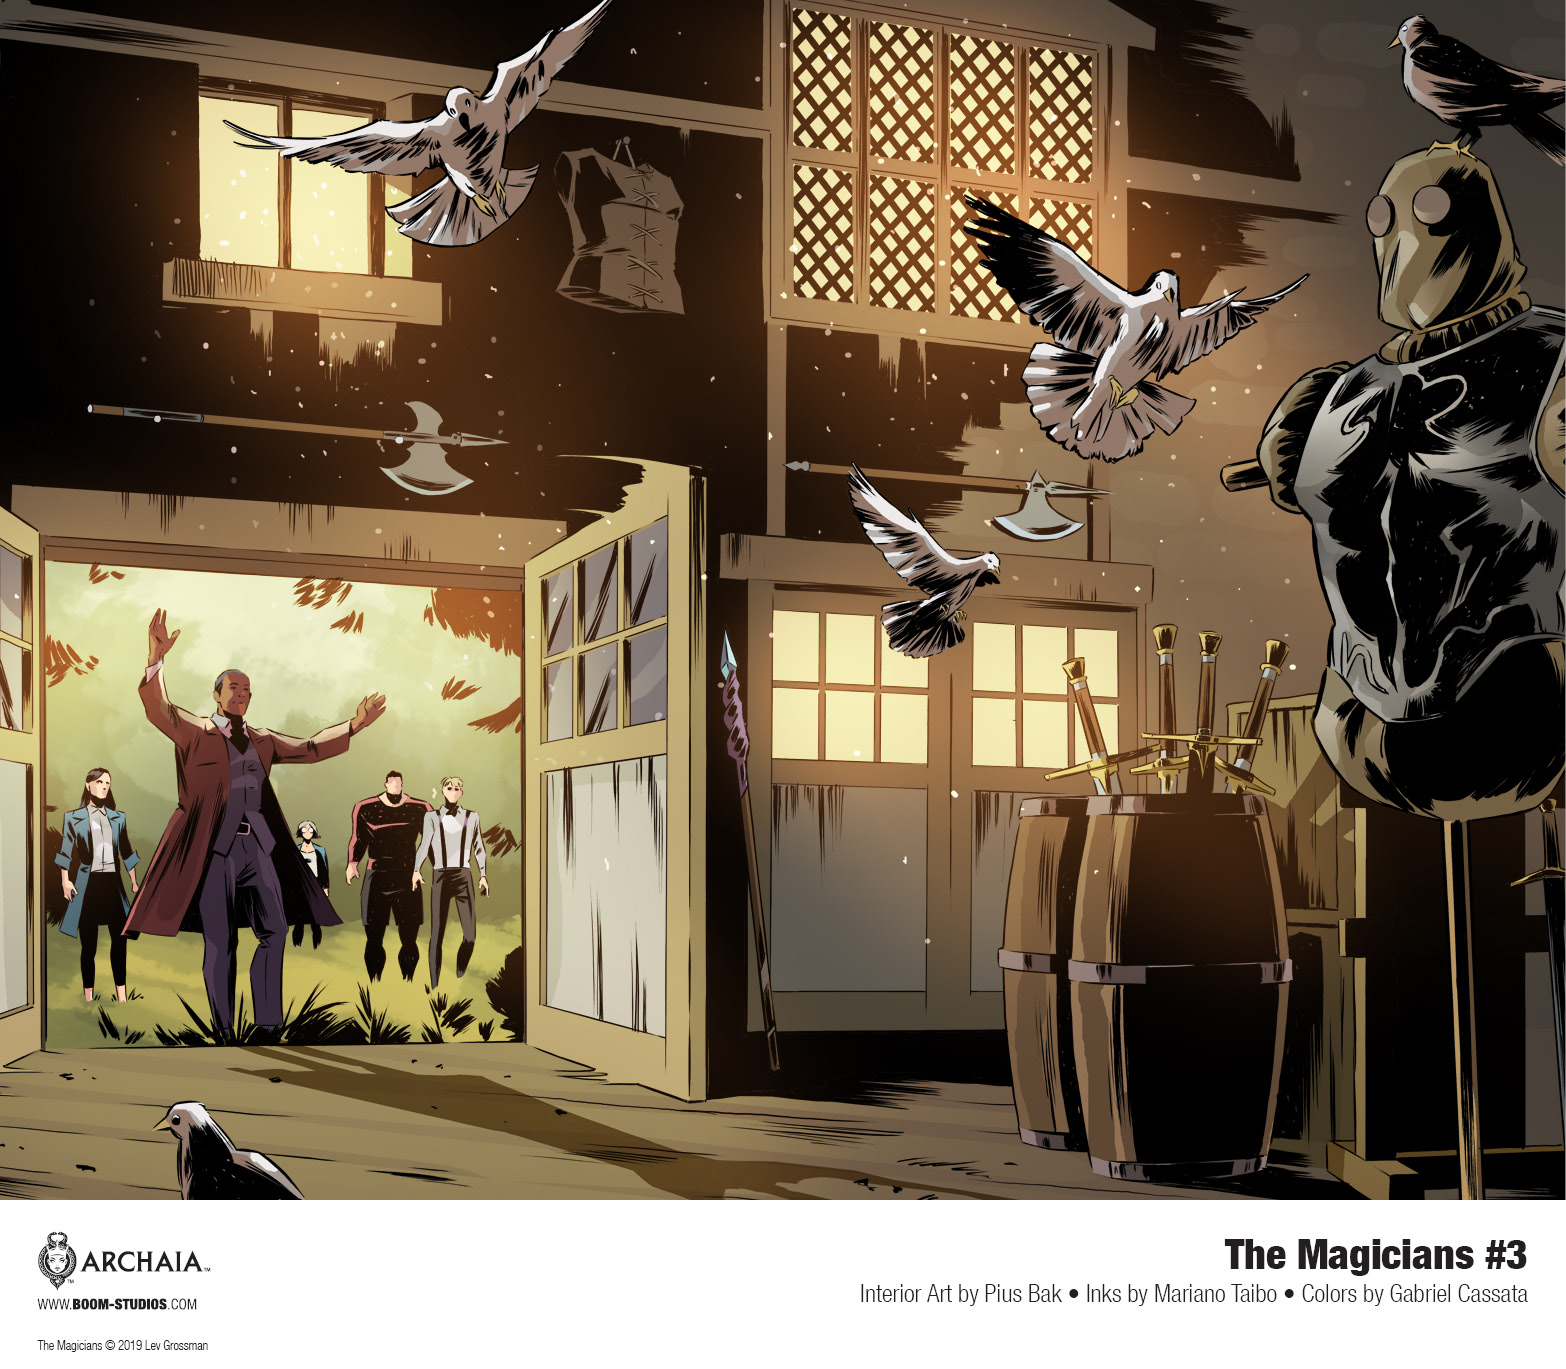 The Magicians #3 preview